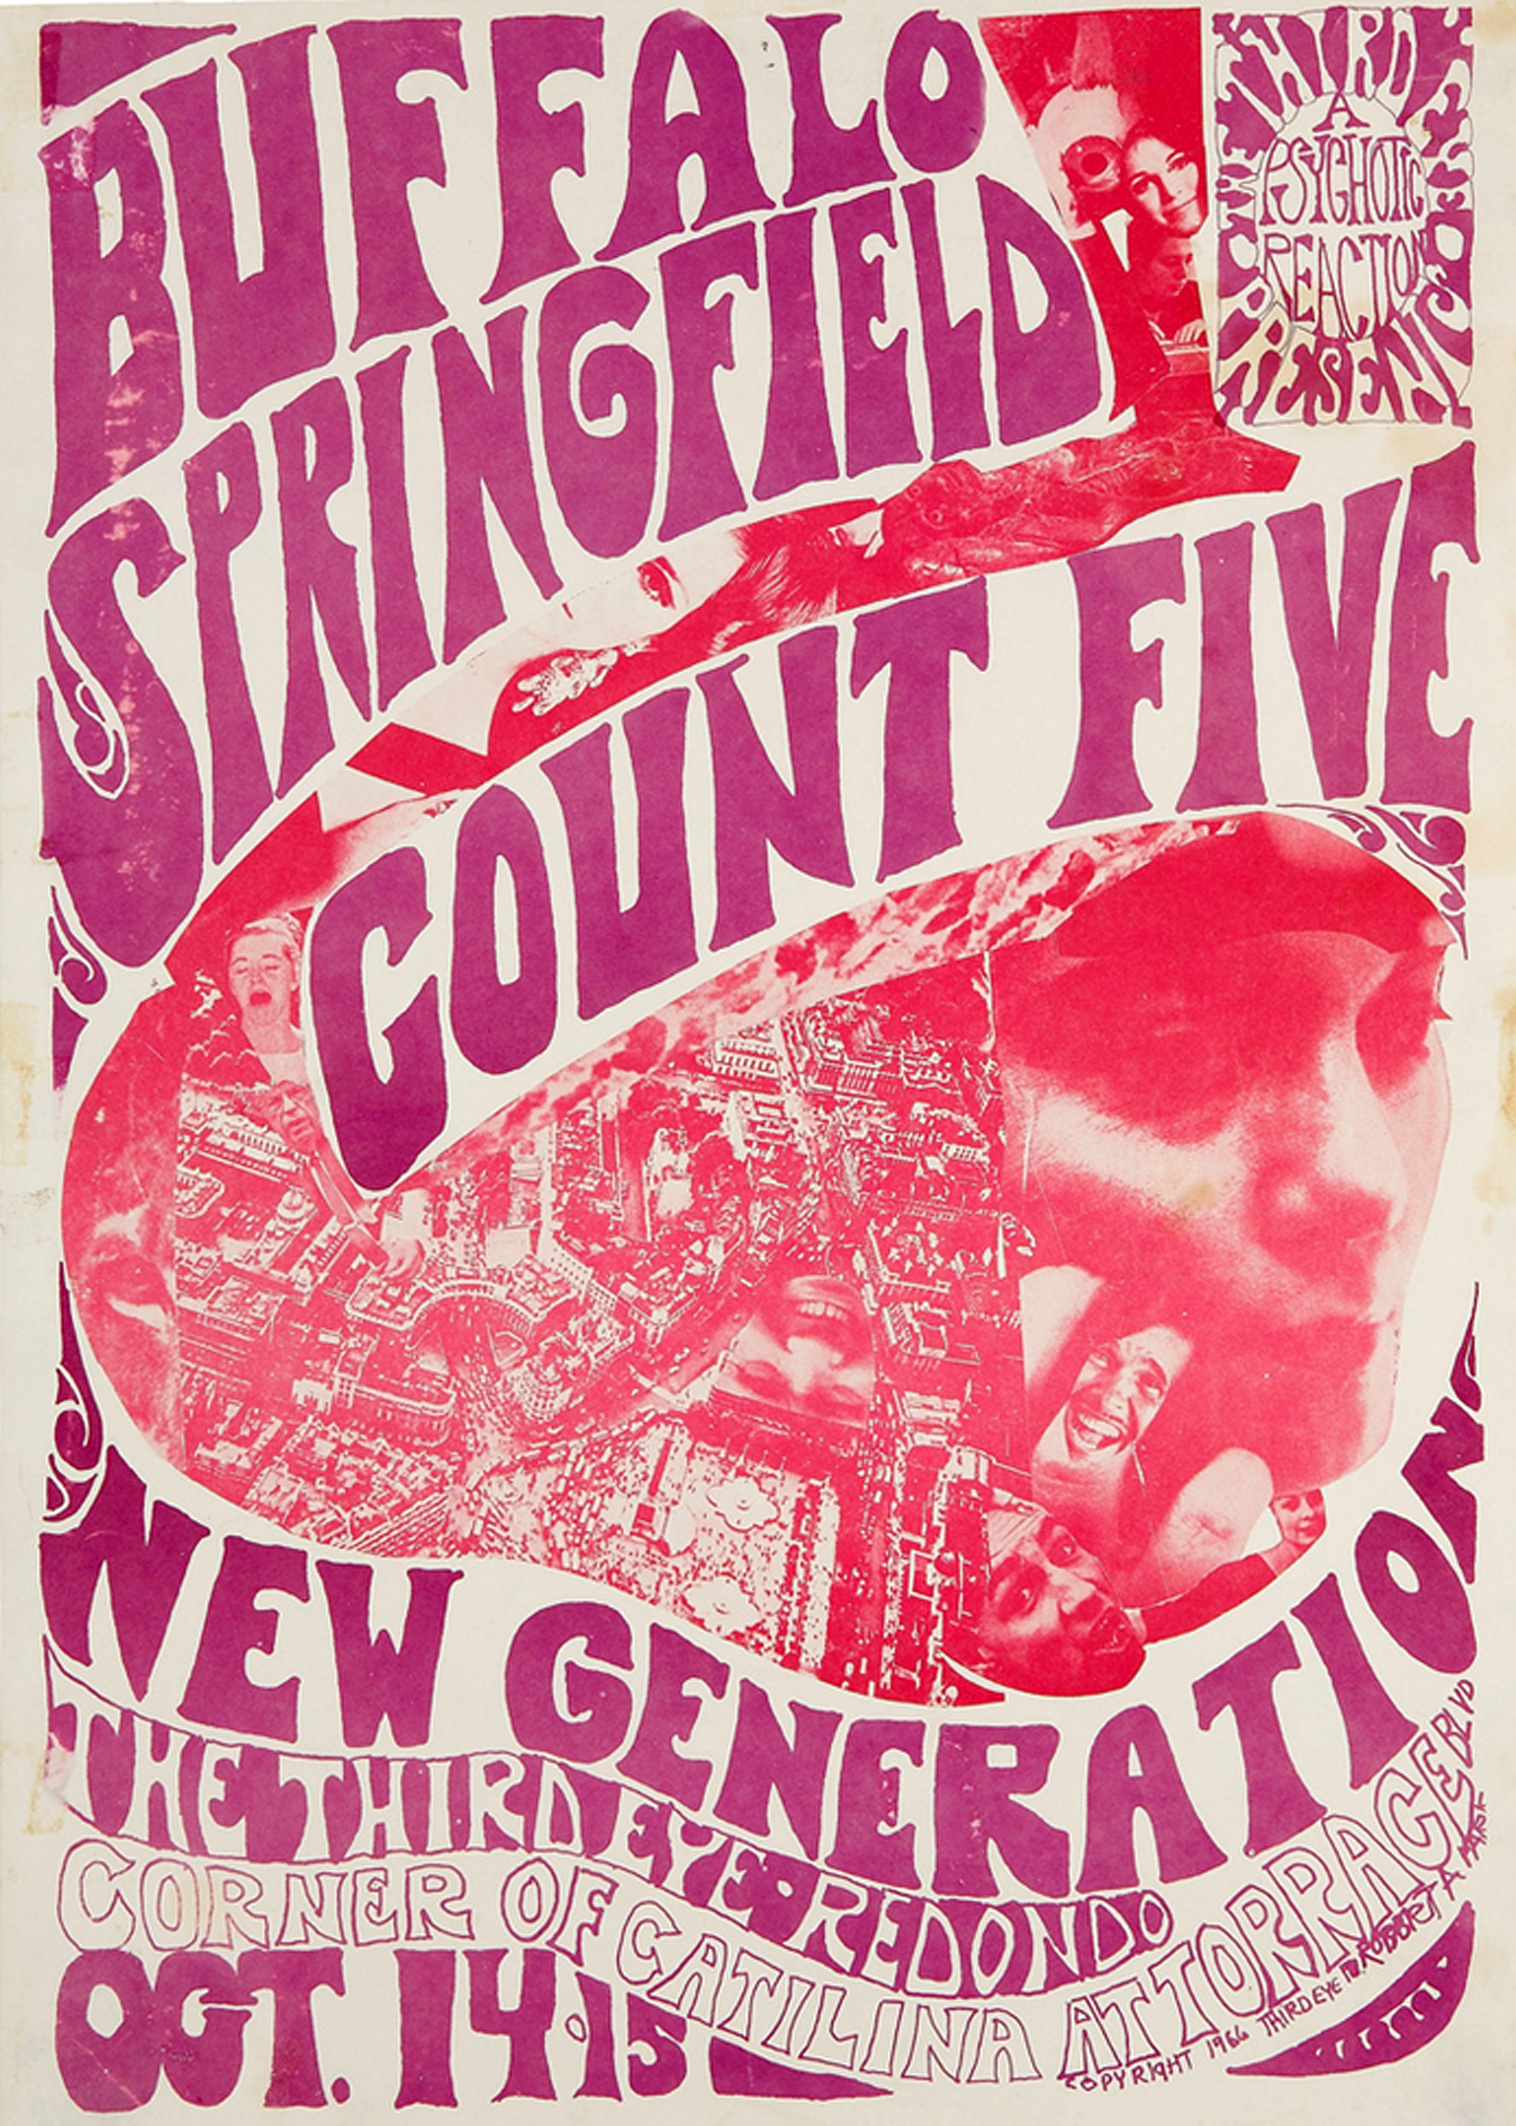 Count Five 1966